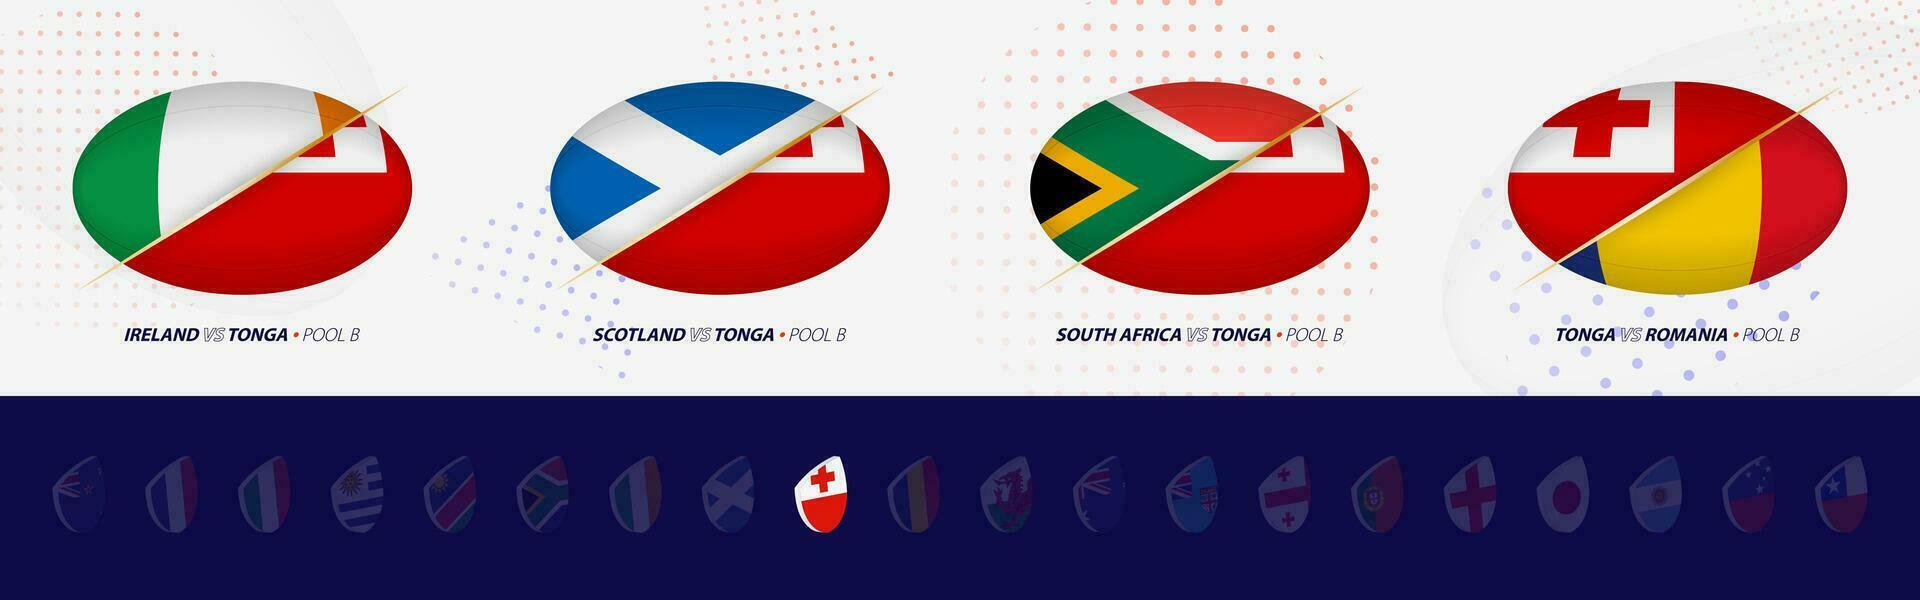 Rugby competition icons of Tonga rugby national team, all four matches icon in pool. vector